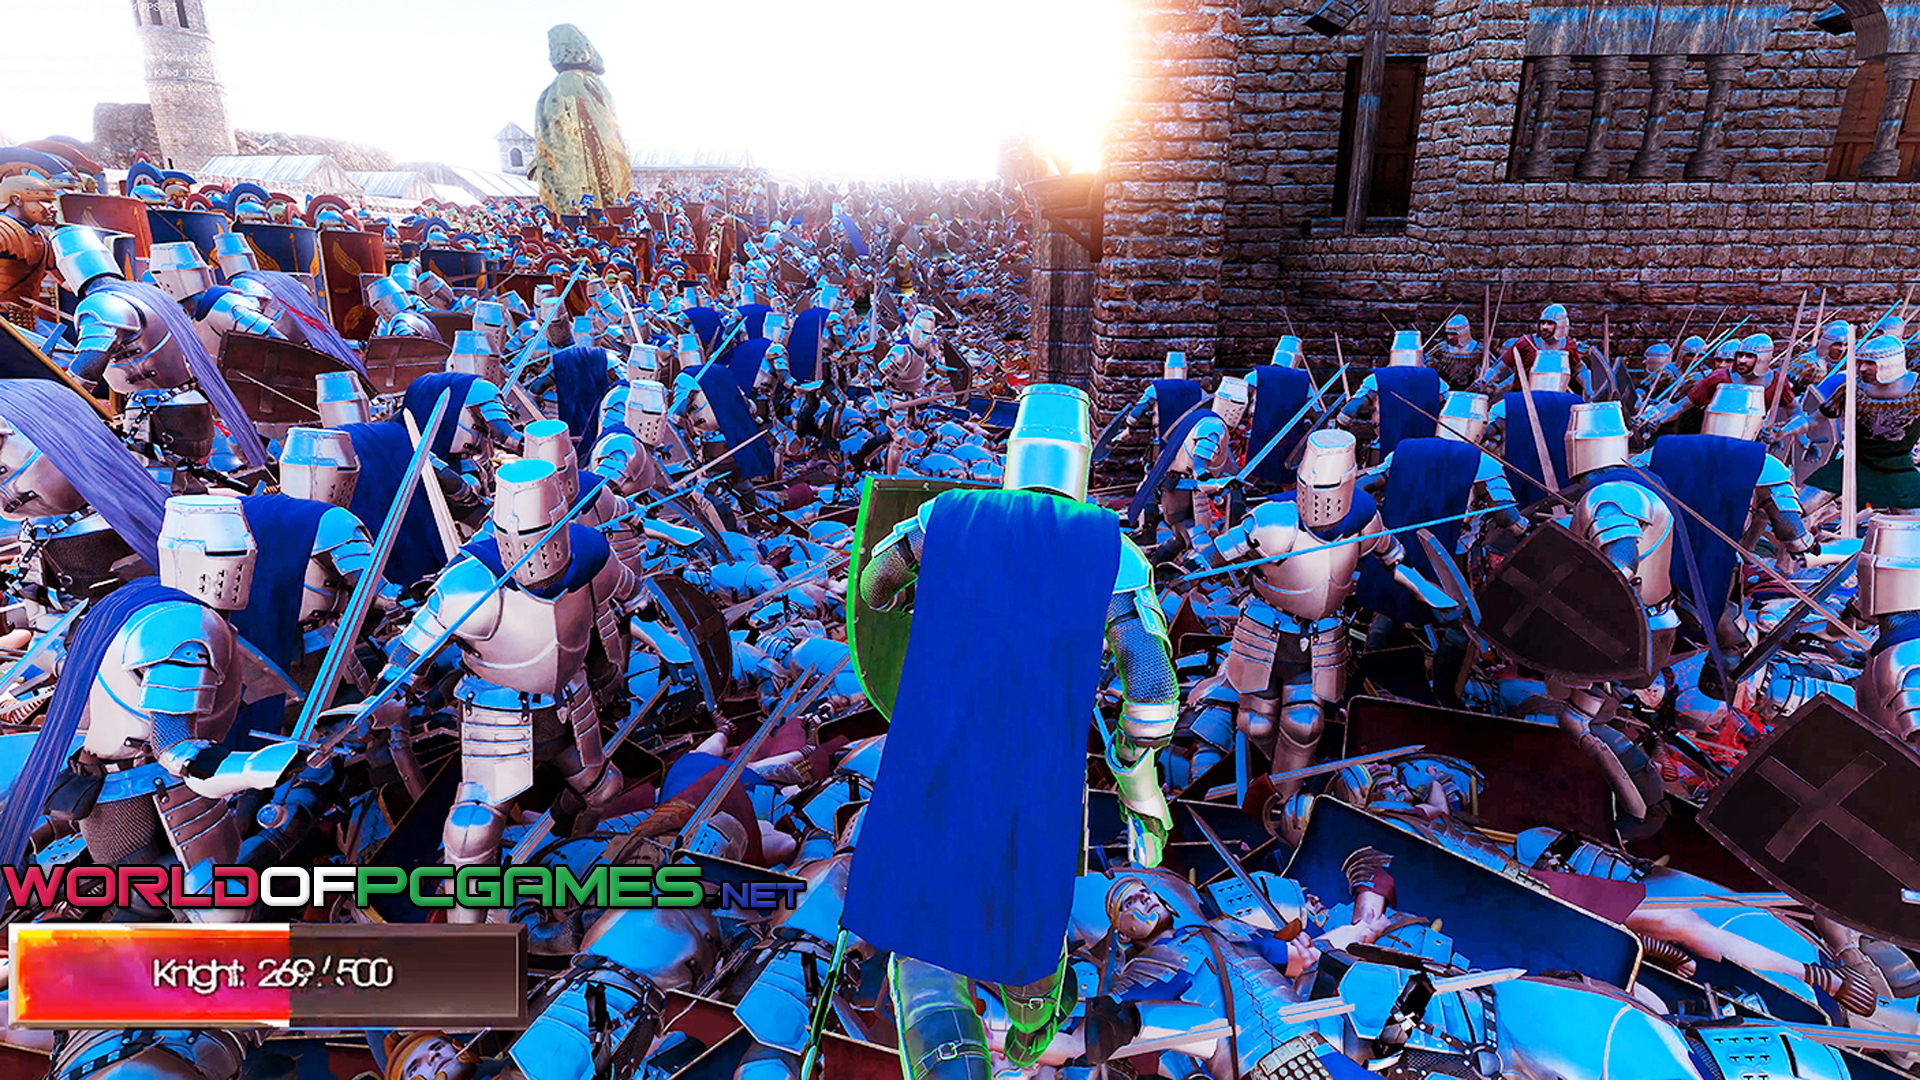 Ultimate Epic Battle Simulator Free Download PC Game By worldof-pcgames.netm